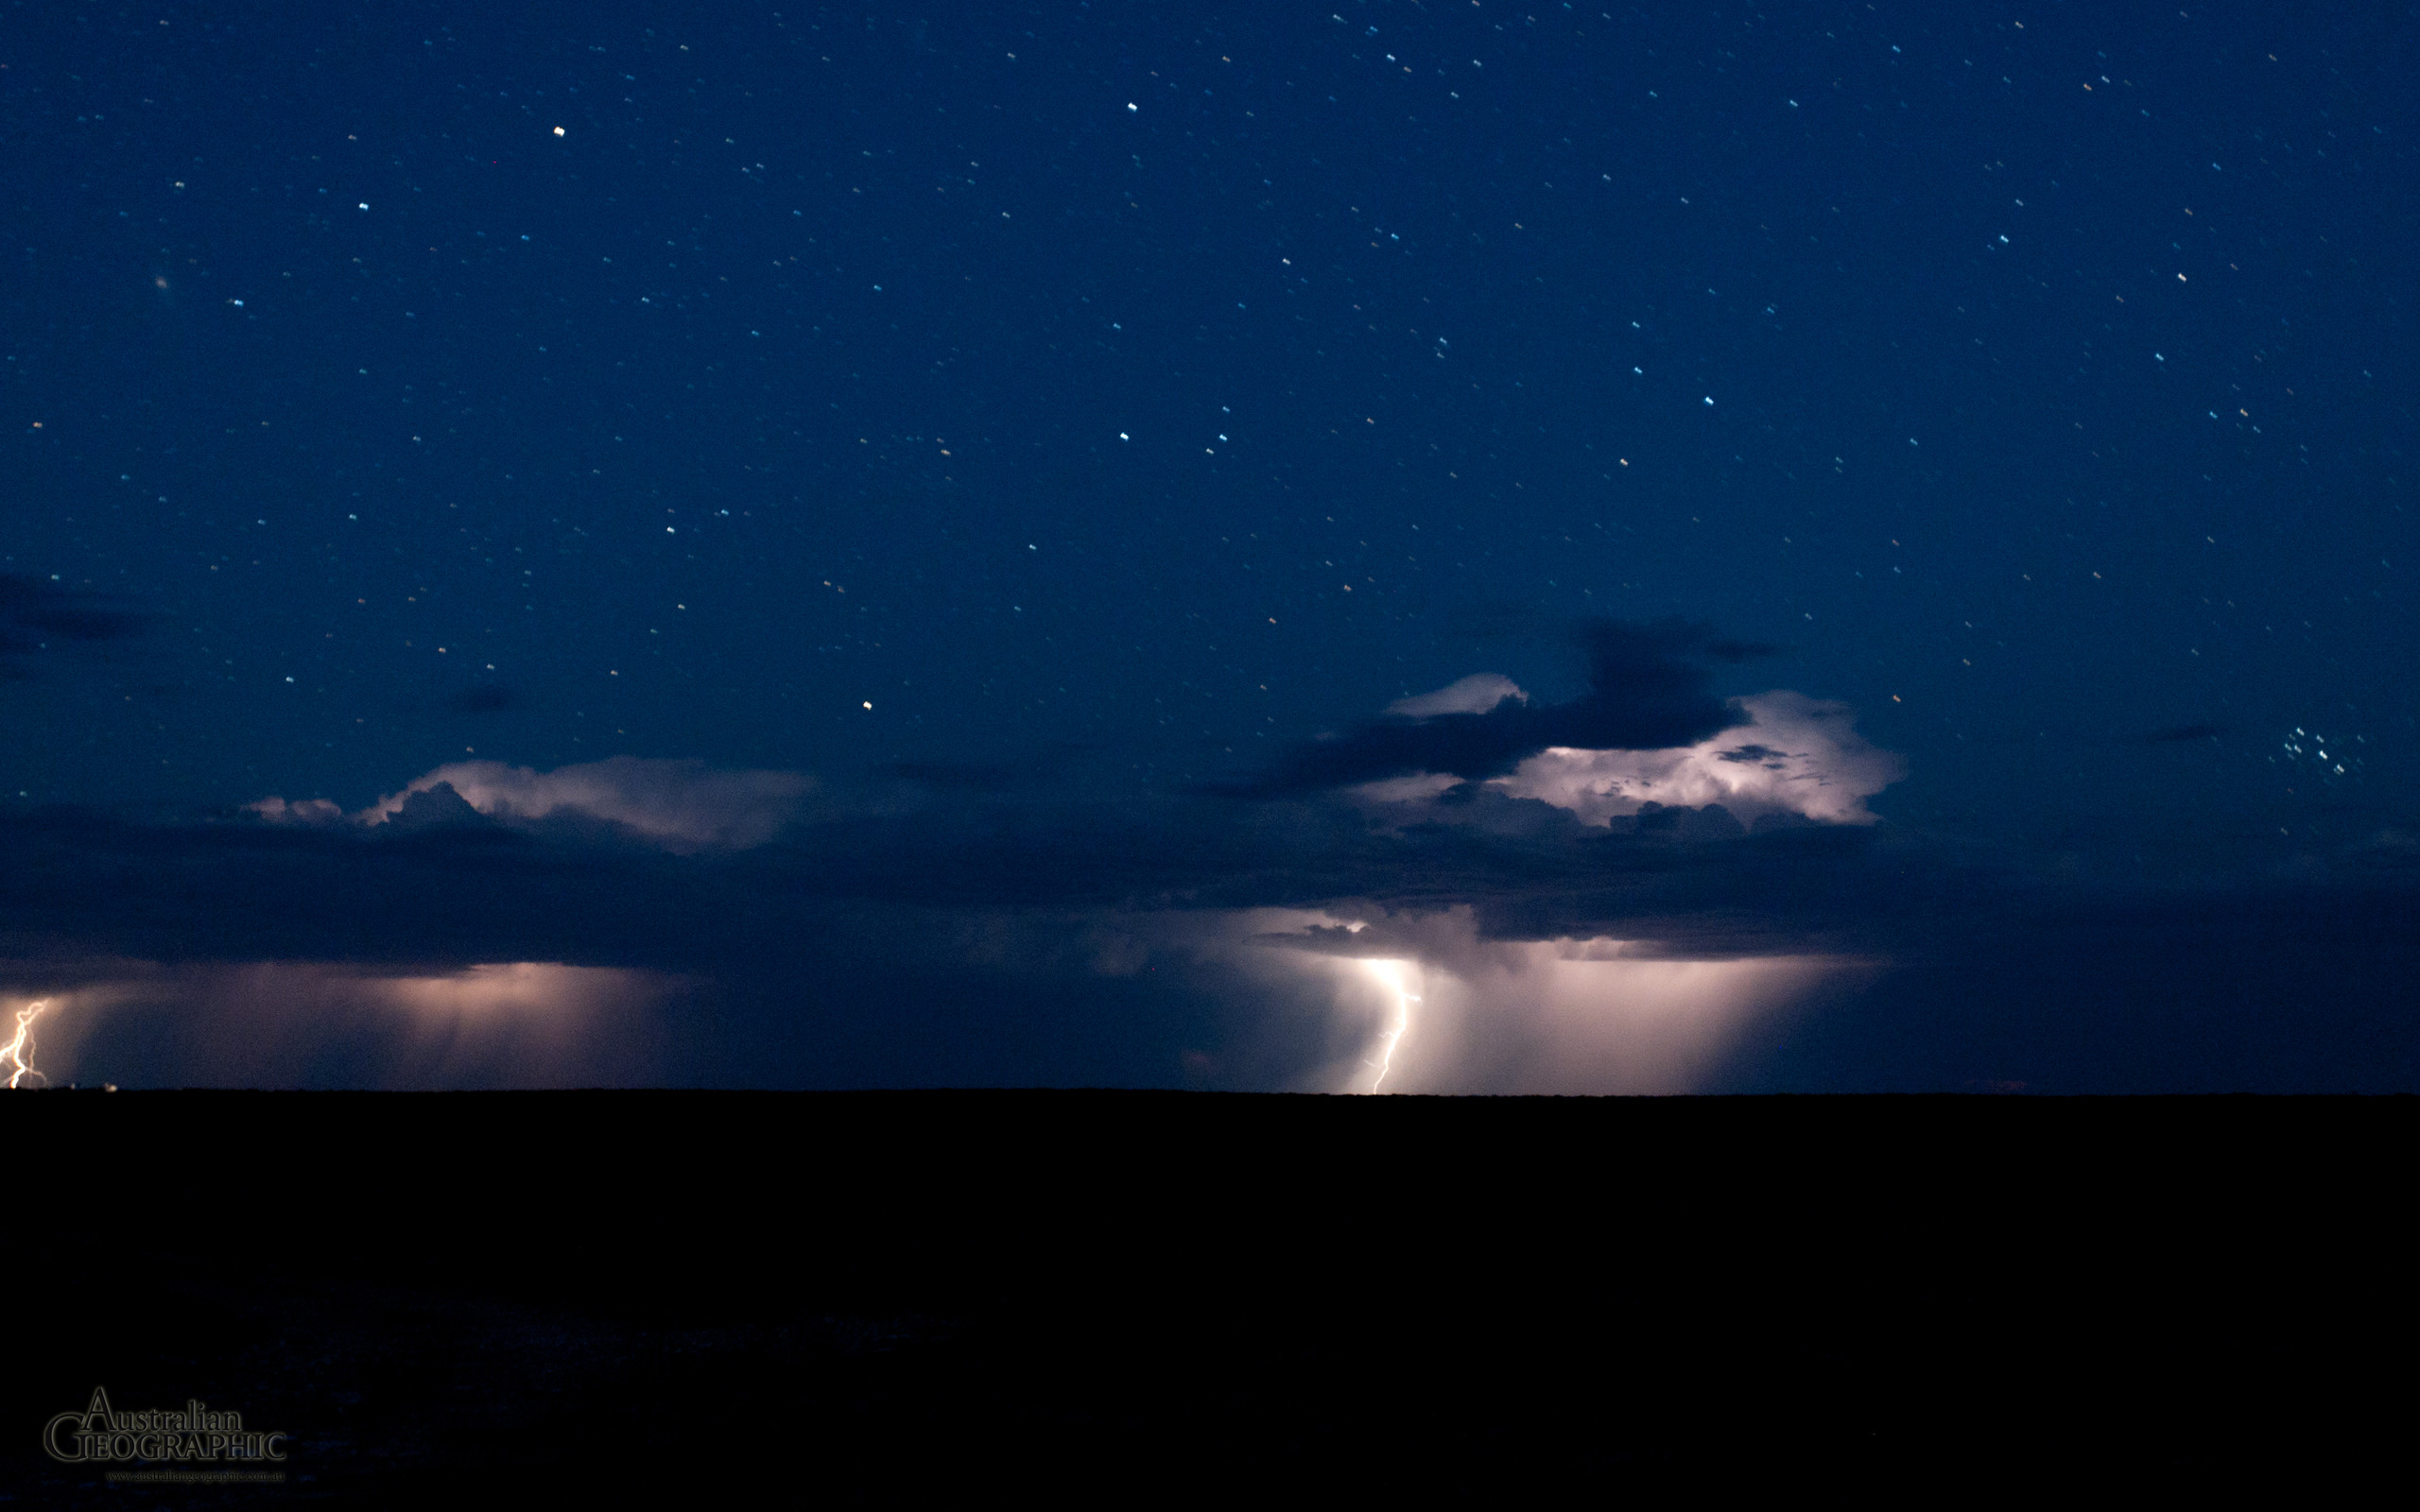 2560x1600 Wallpapers. Images of Australia: Outback lightning storm